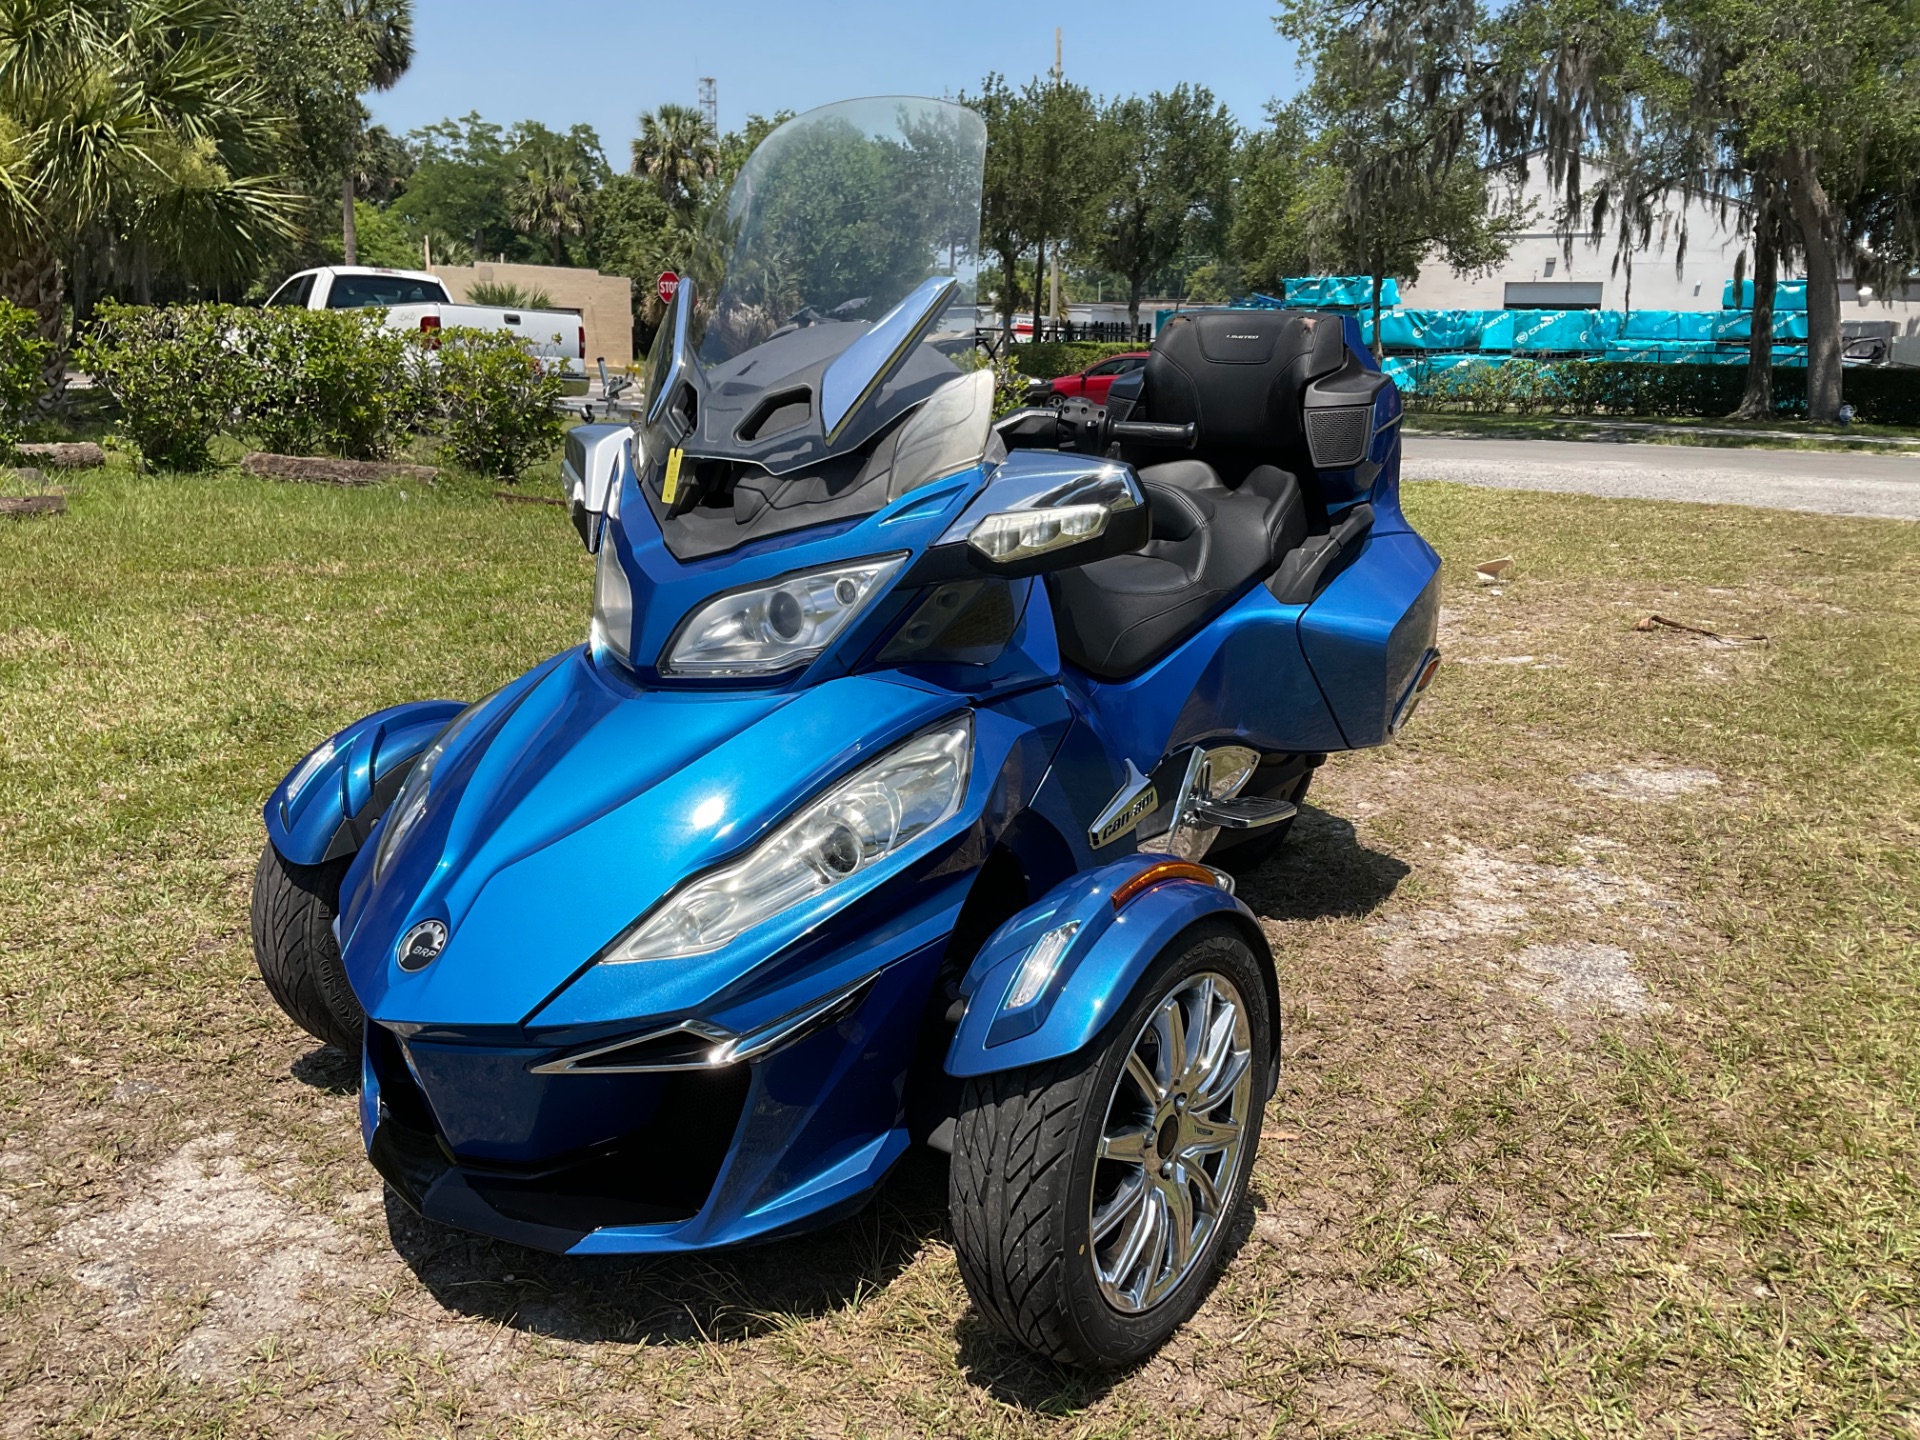 2018 Can-Am Spyder RT Limited in Sanford, Florida - Photo 3